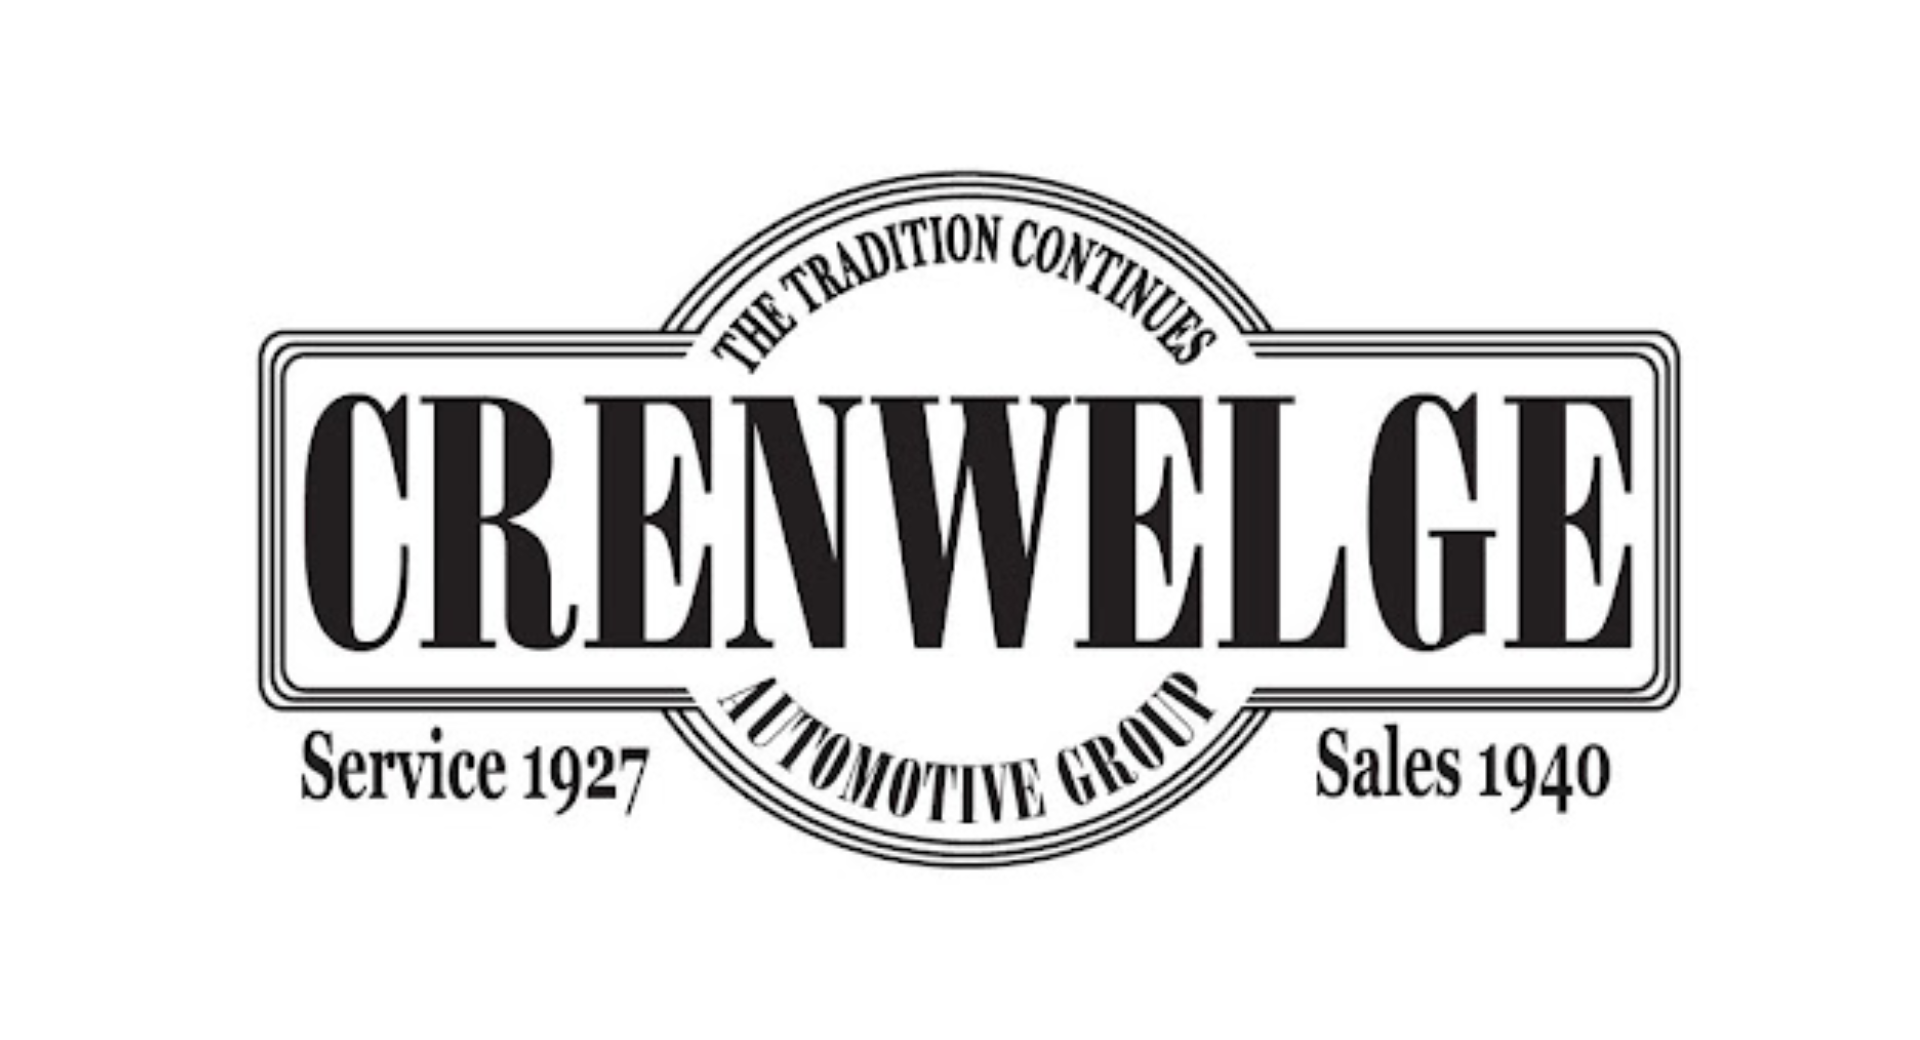 Crenwelge CDJR is a Certified Agriculture Dealership.